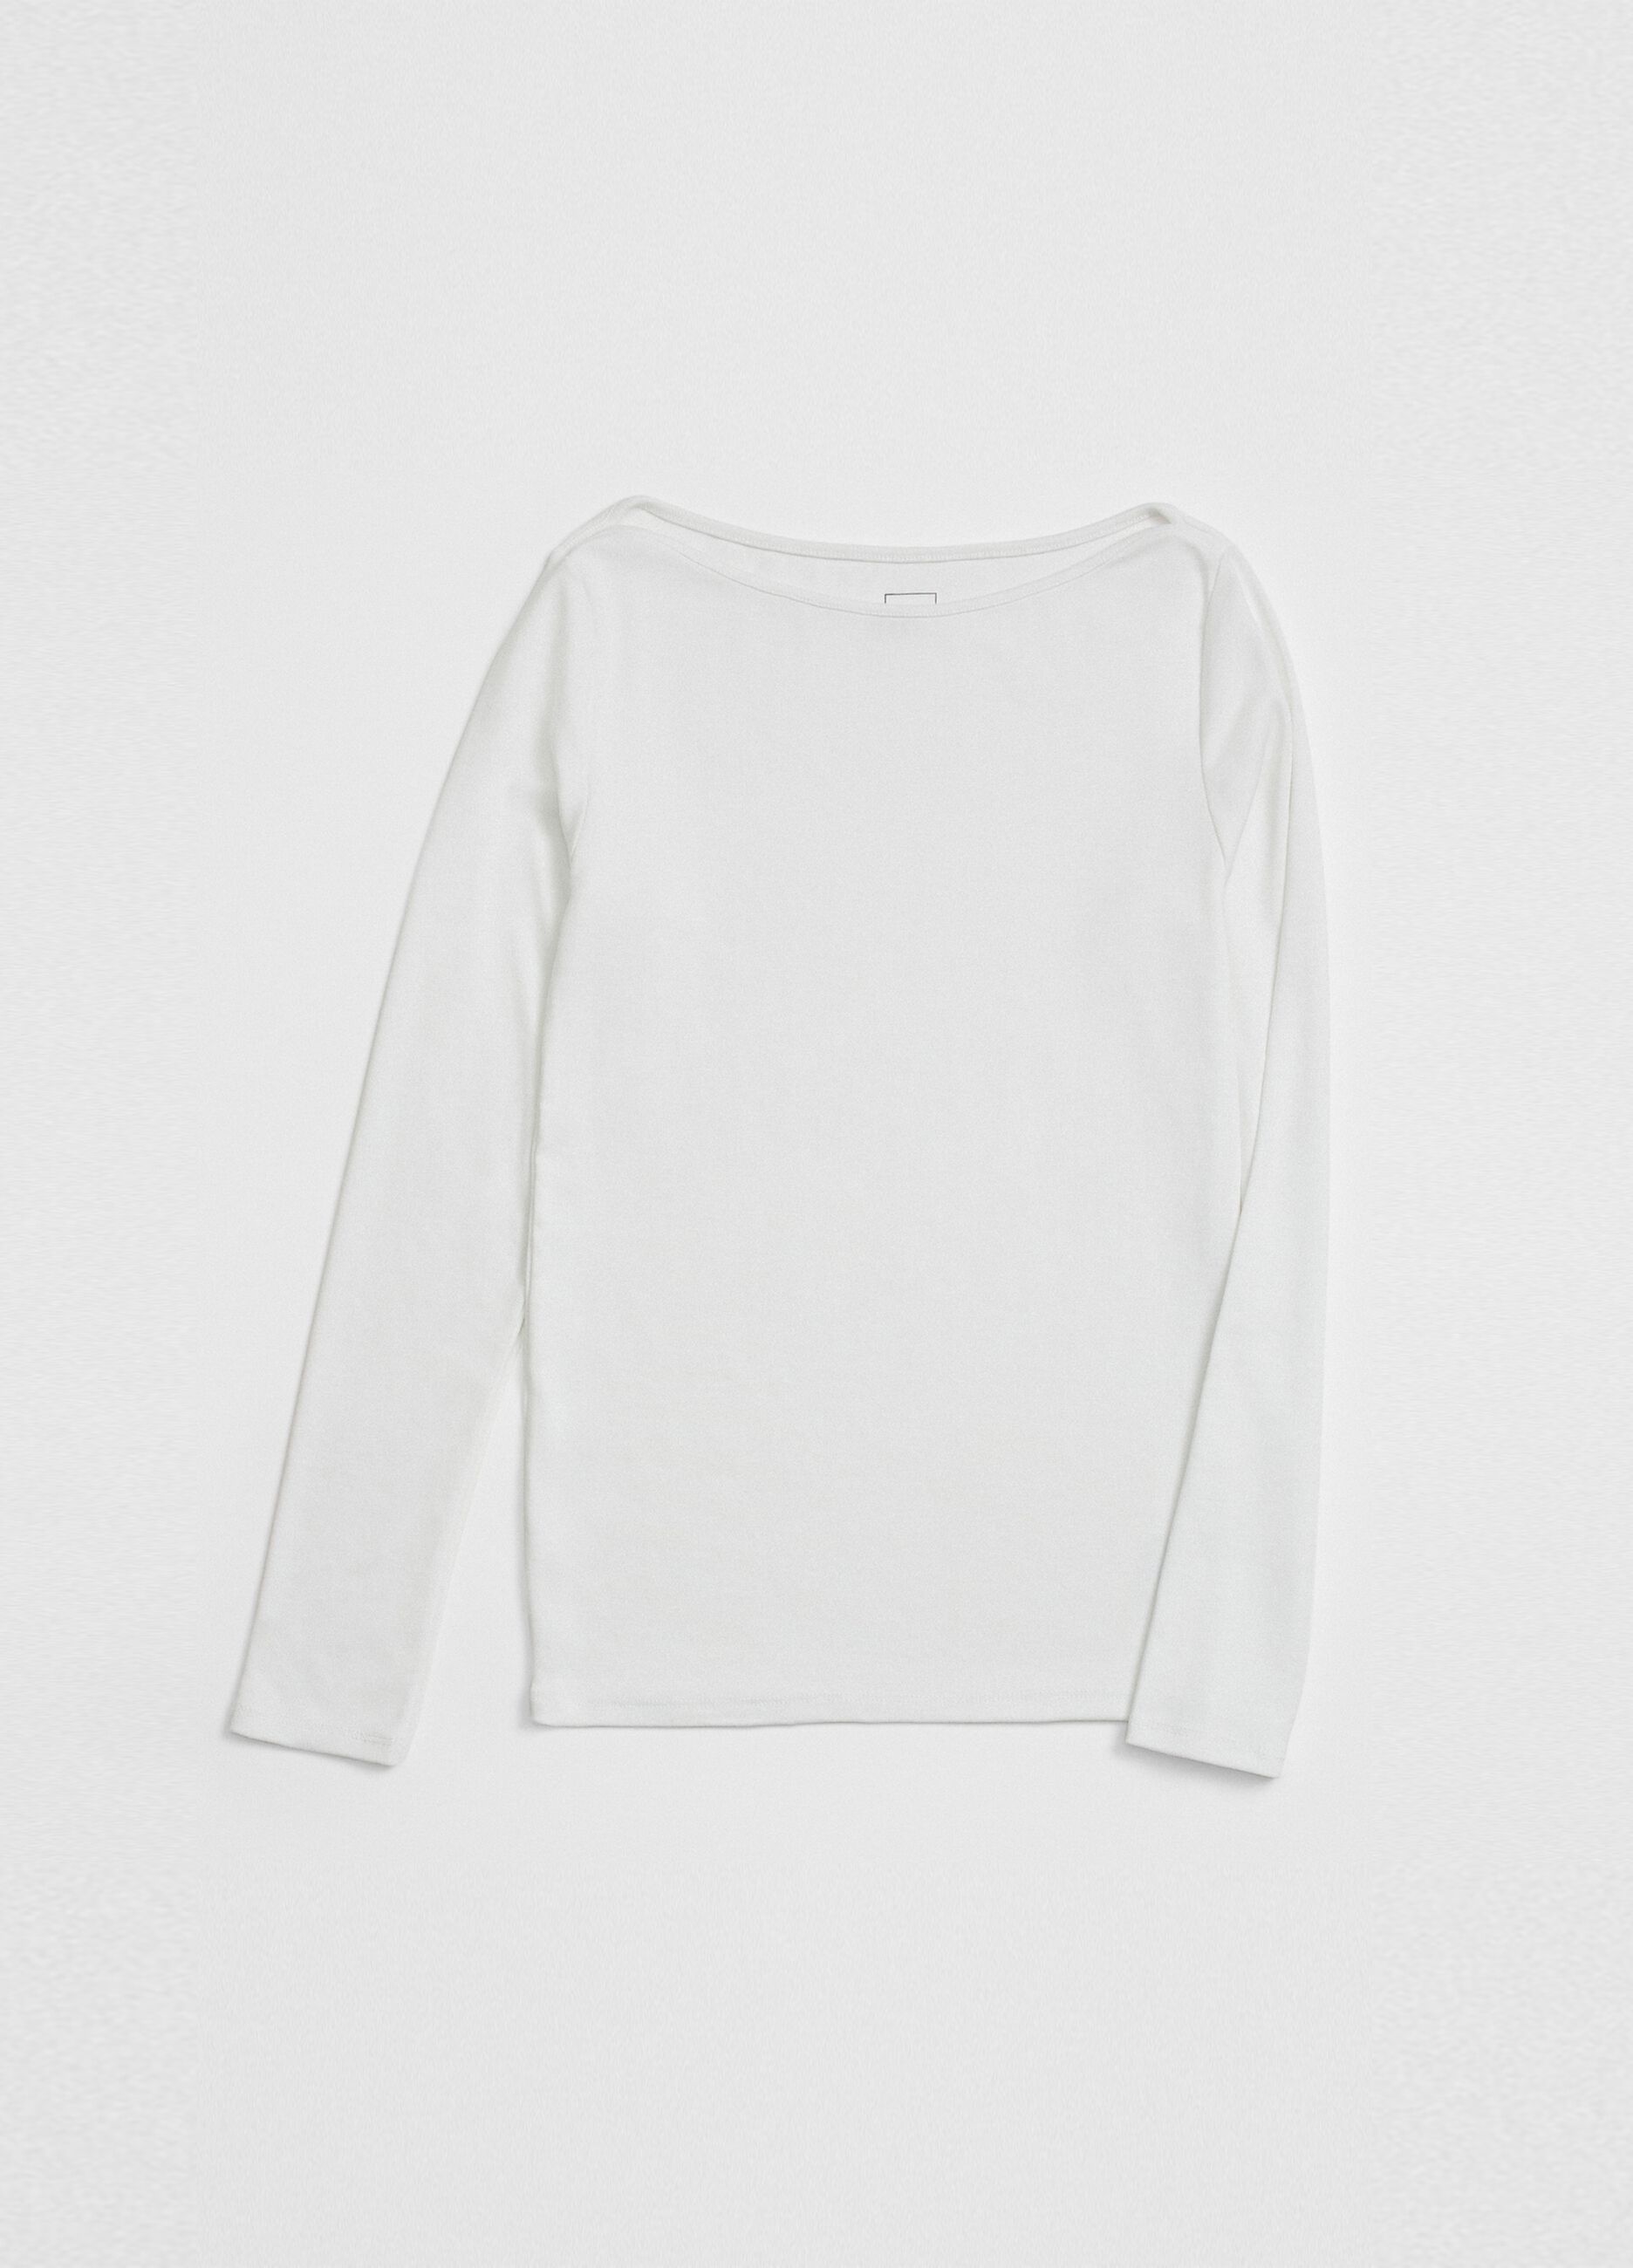 Long-sleeved T-shirt with boat neck